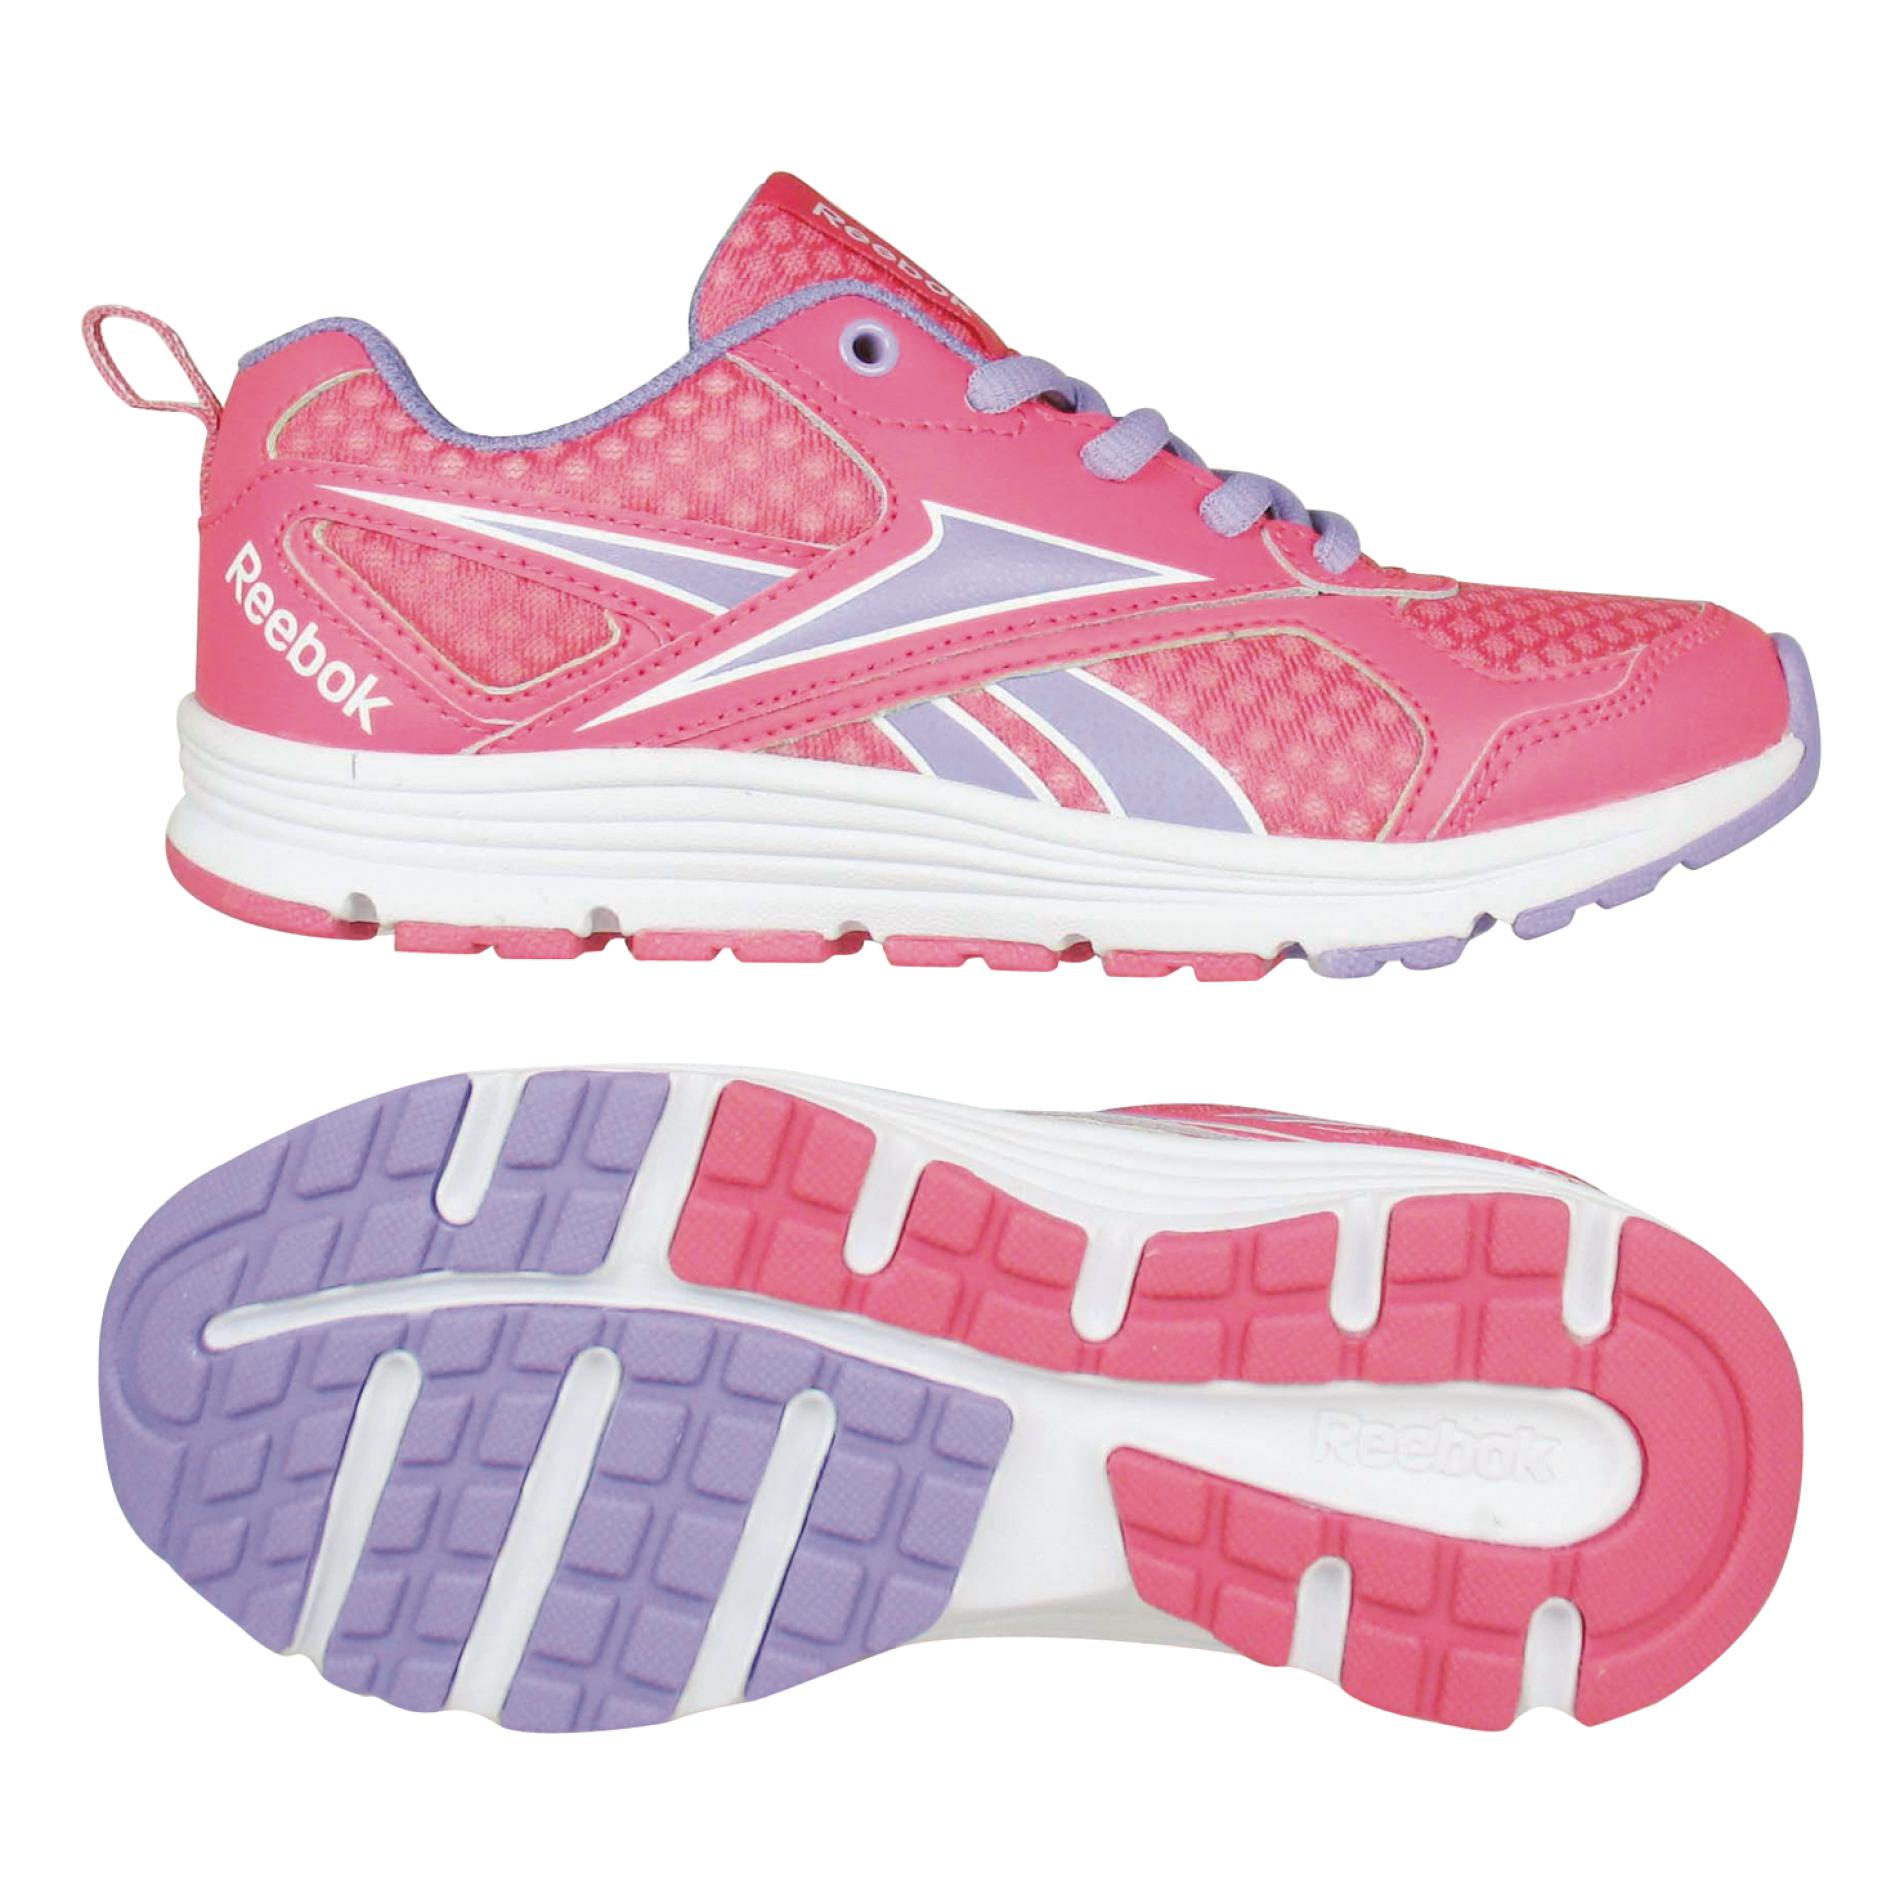 Reebok Girl's Almotio RS Purple/Pink Athletic Shoe